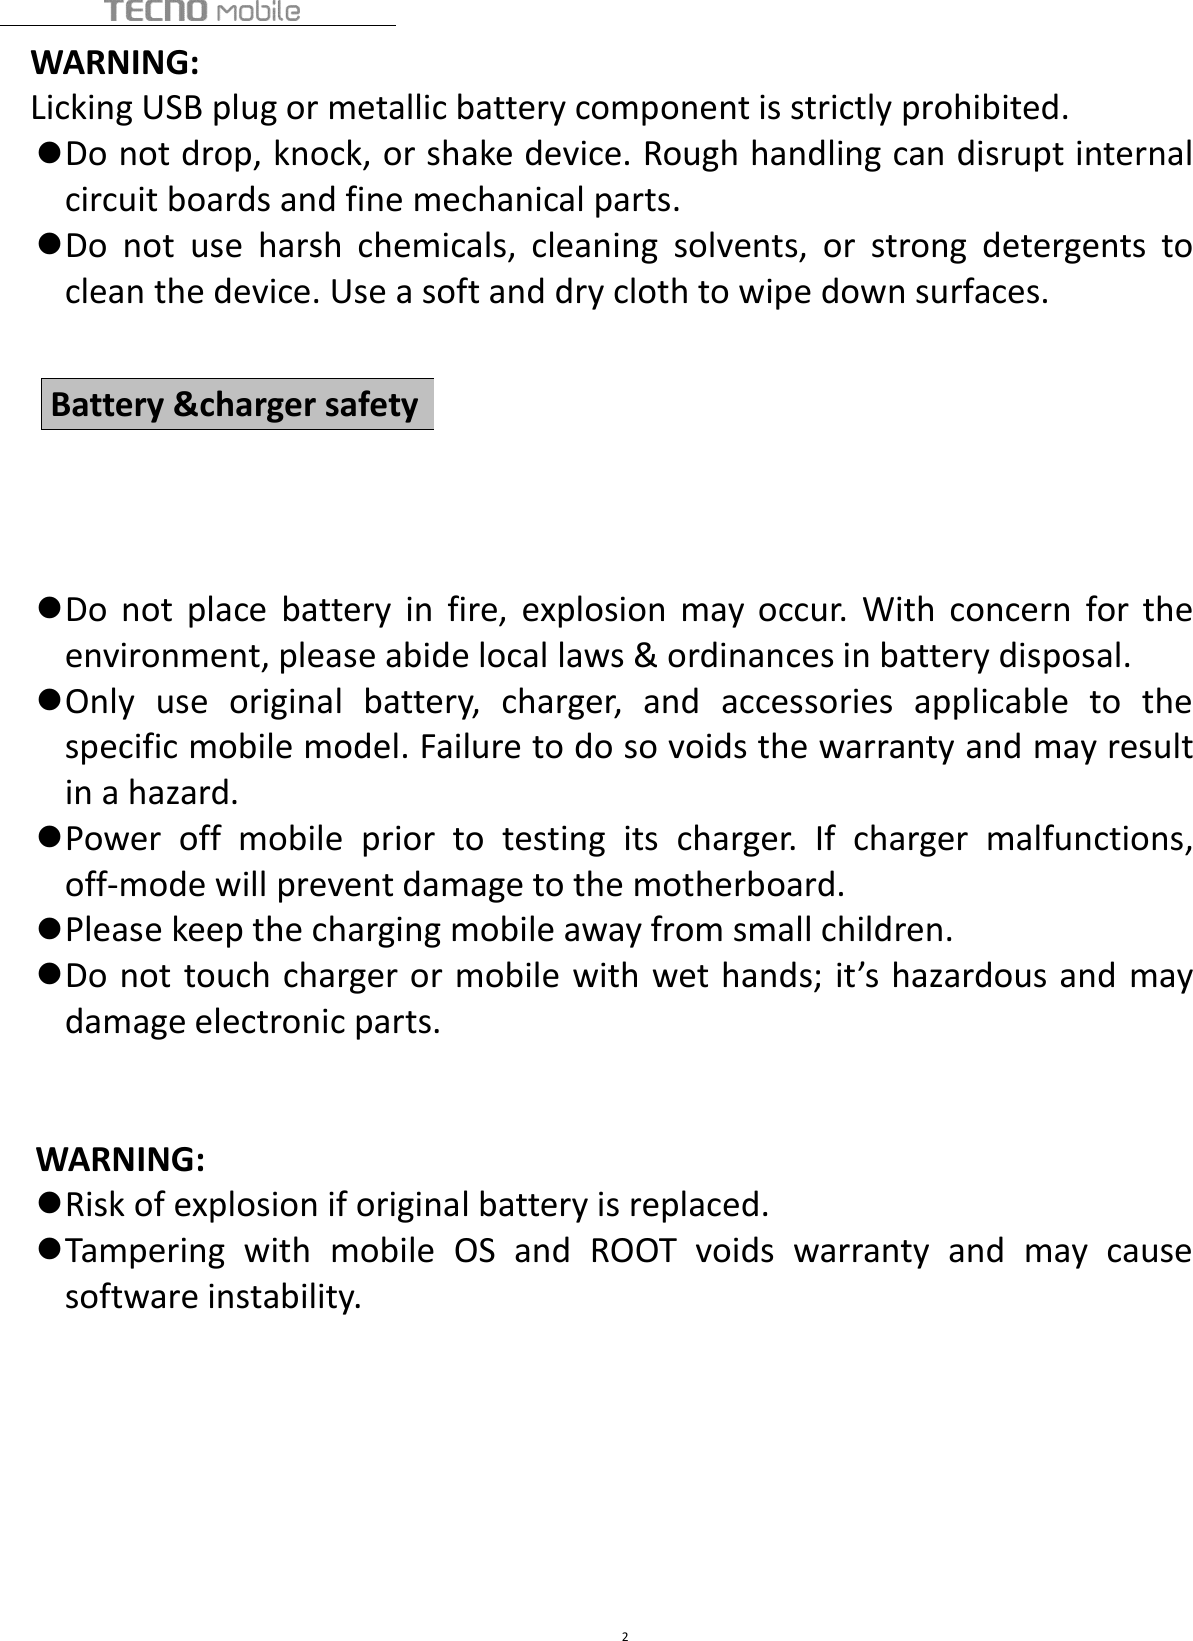 2WARNING:Licking USB plug or metallic battery component is strictly prohibited.Do not drop, knock, or shake device. Rough handling can disrupt internalcircuit boards and fine mechanical parts.Do not use harsh chemicals, cleaning solvents, or strong detergents toclean the device. Use a soft and dry cloth to wipe down surfaces.Do not place battery in fire, explosion may occur. With concern for theenvironment, please abide local laws &amp; ordinances in battery disposal.Only use original battery, charger, and accessories applicable to thespecific mobile model. Failure to do so voids the warranty and may resultin a hazard.Power off mobile prior to testing its charger. If charger malfunctions,off-mode will prevent damage to the motherboard.Please keep the charging mobile away from small children.Do not touch charger or mobile with wet hands; it’s hazardous and maydamage electronic parts.WARNING:Risk of explosion if original battery is replaced.Tampering with mobile OS and ROOT voids warranty and may causesoftware instability.Battery &amp;charger safety